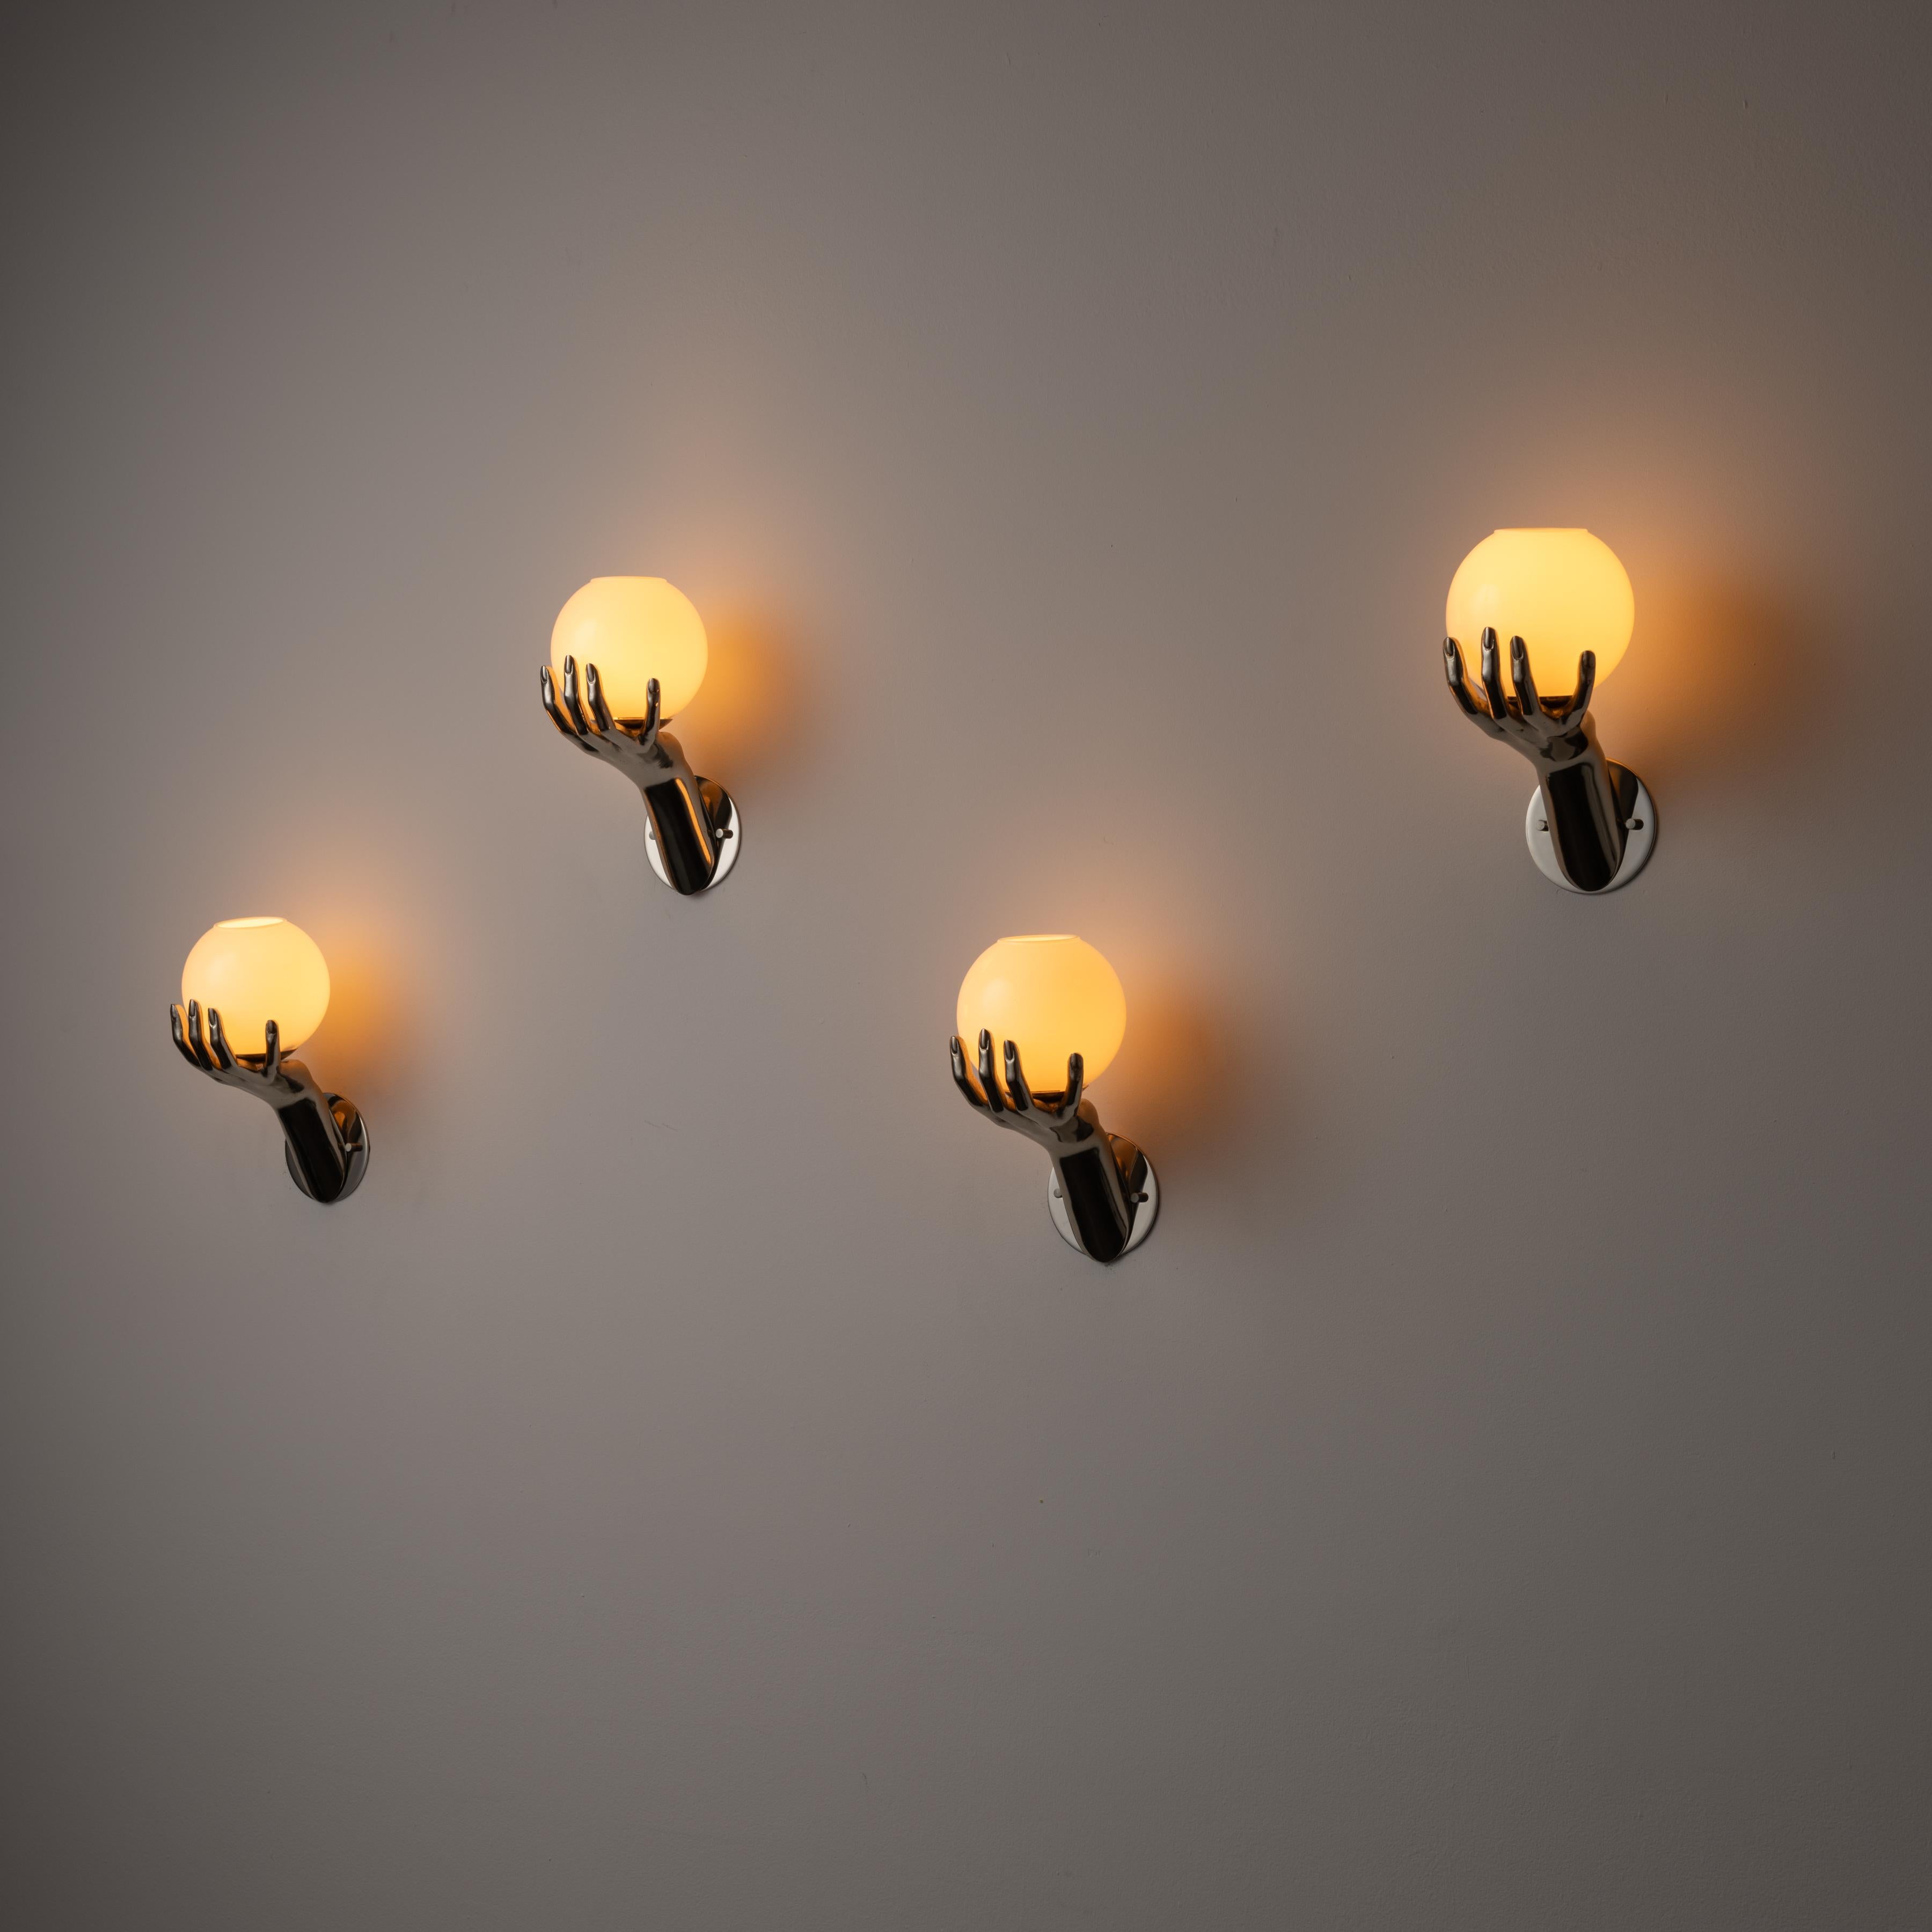 Sconces by Maison Arlus. Designed and manufactured in France, circa the 1970s. Chrome hands with opal glass diffusers. Each glass diffuser has an opened top, allowing for an uplight effect of illumination. Each sconce holds a single E14 socket type,